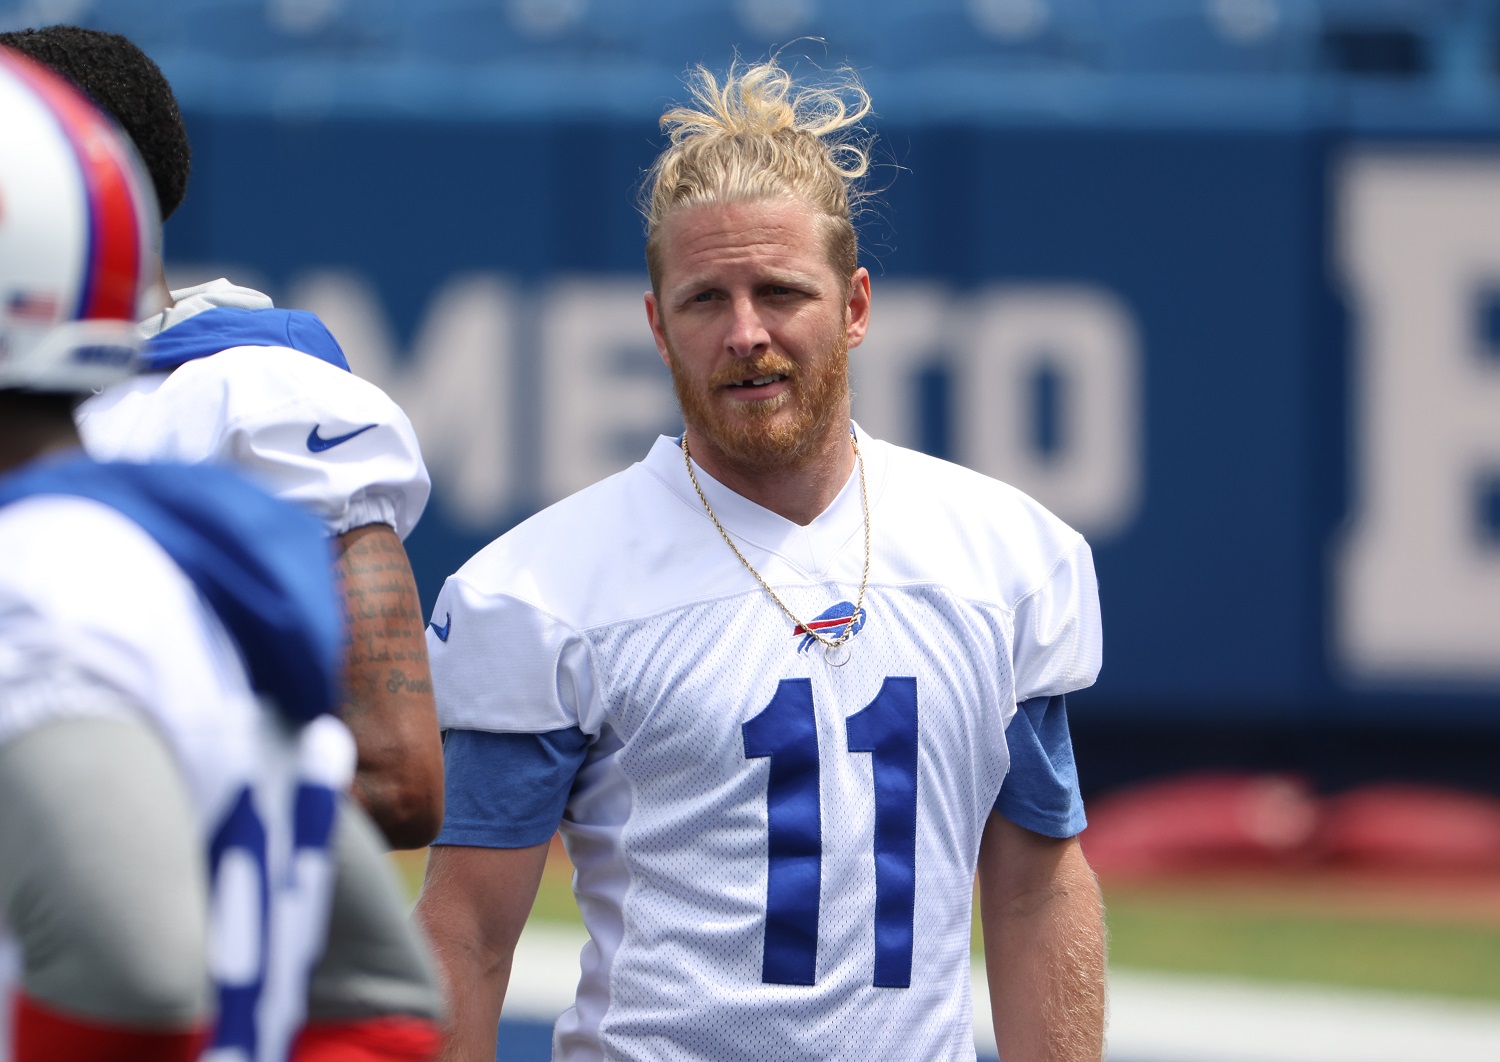 Cole Beasley of the Buffalo Bills during workouts at Highmark Stadium on June 2, 2021, in Orchard Park, New York.